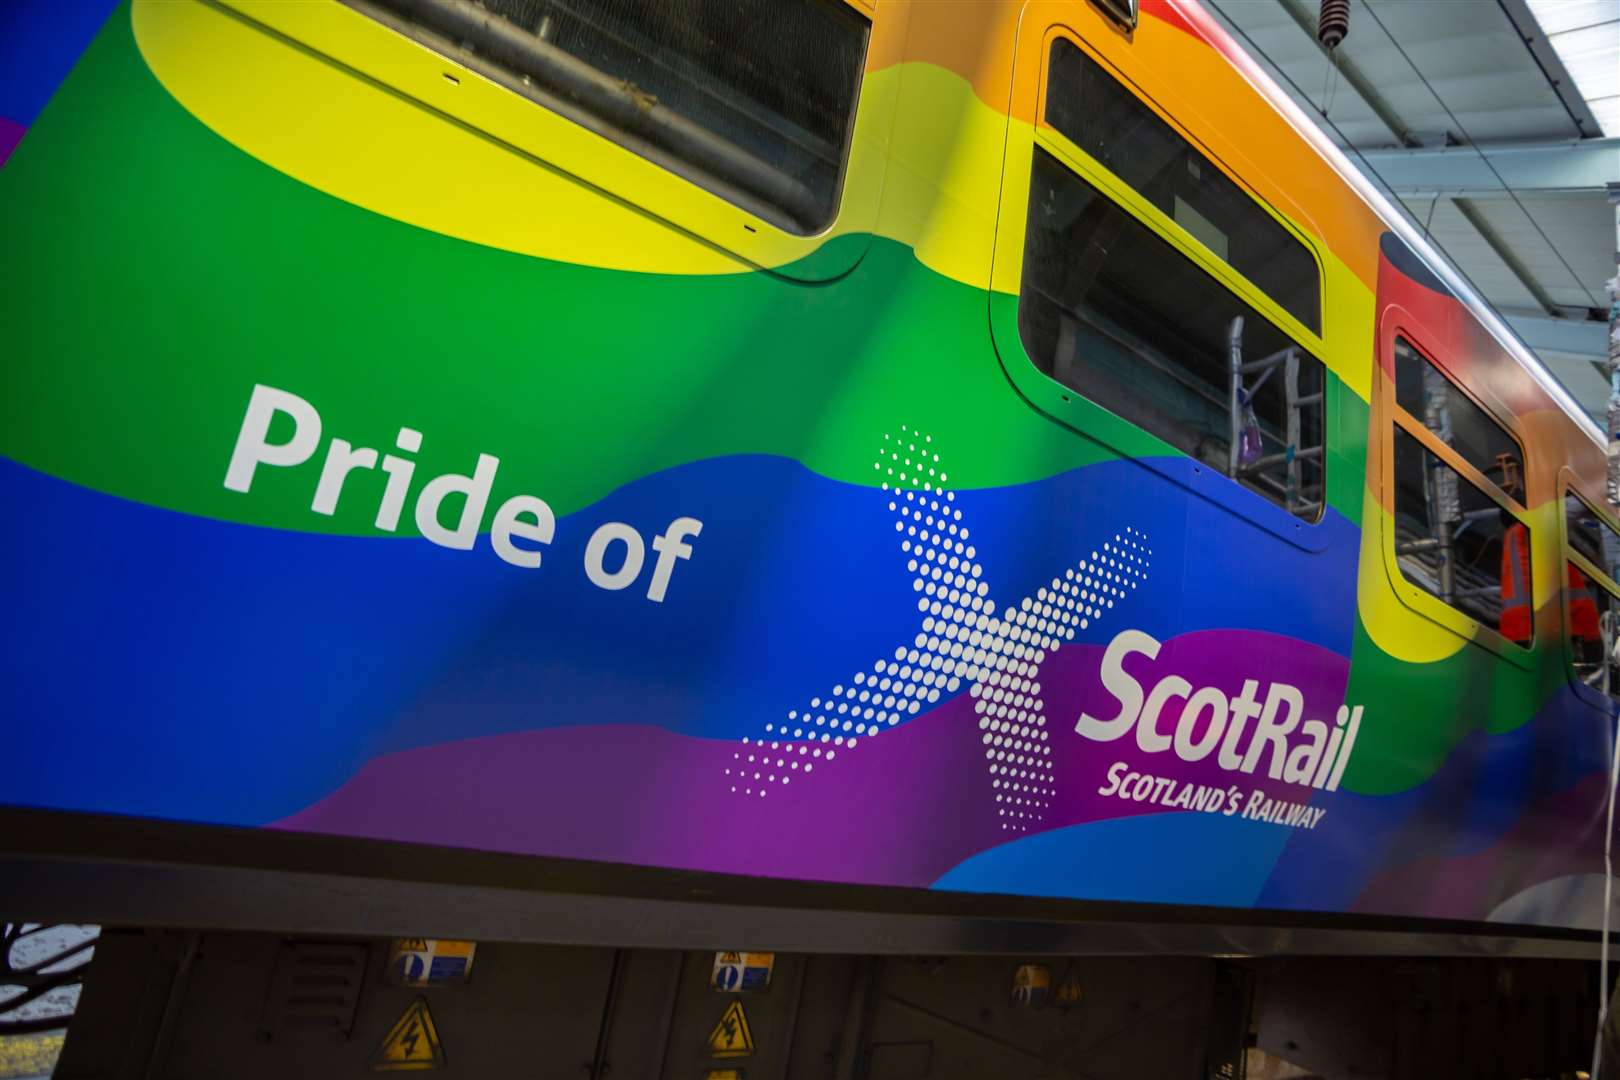 Pride of ScotRail launched last weekend.